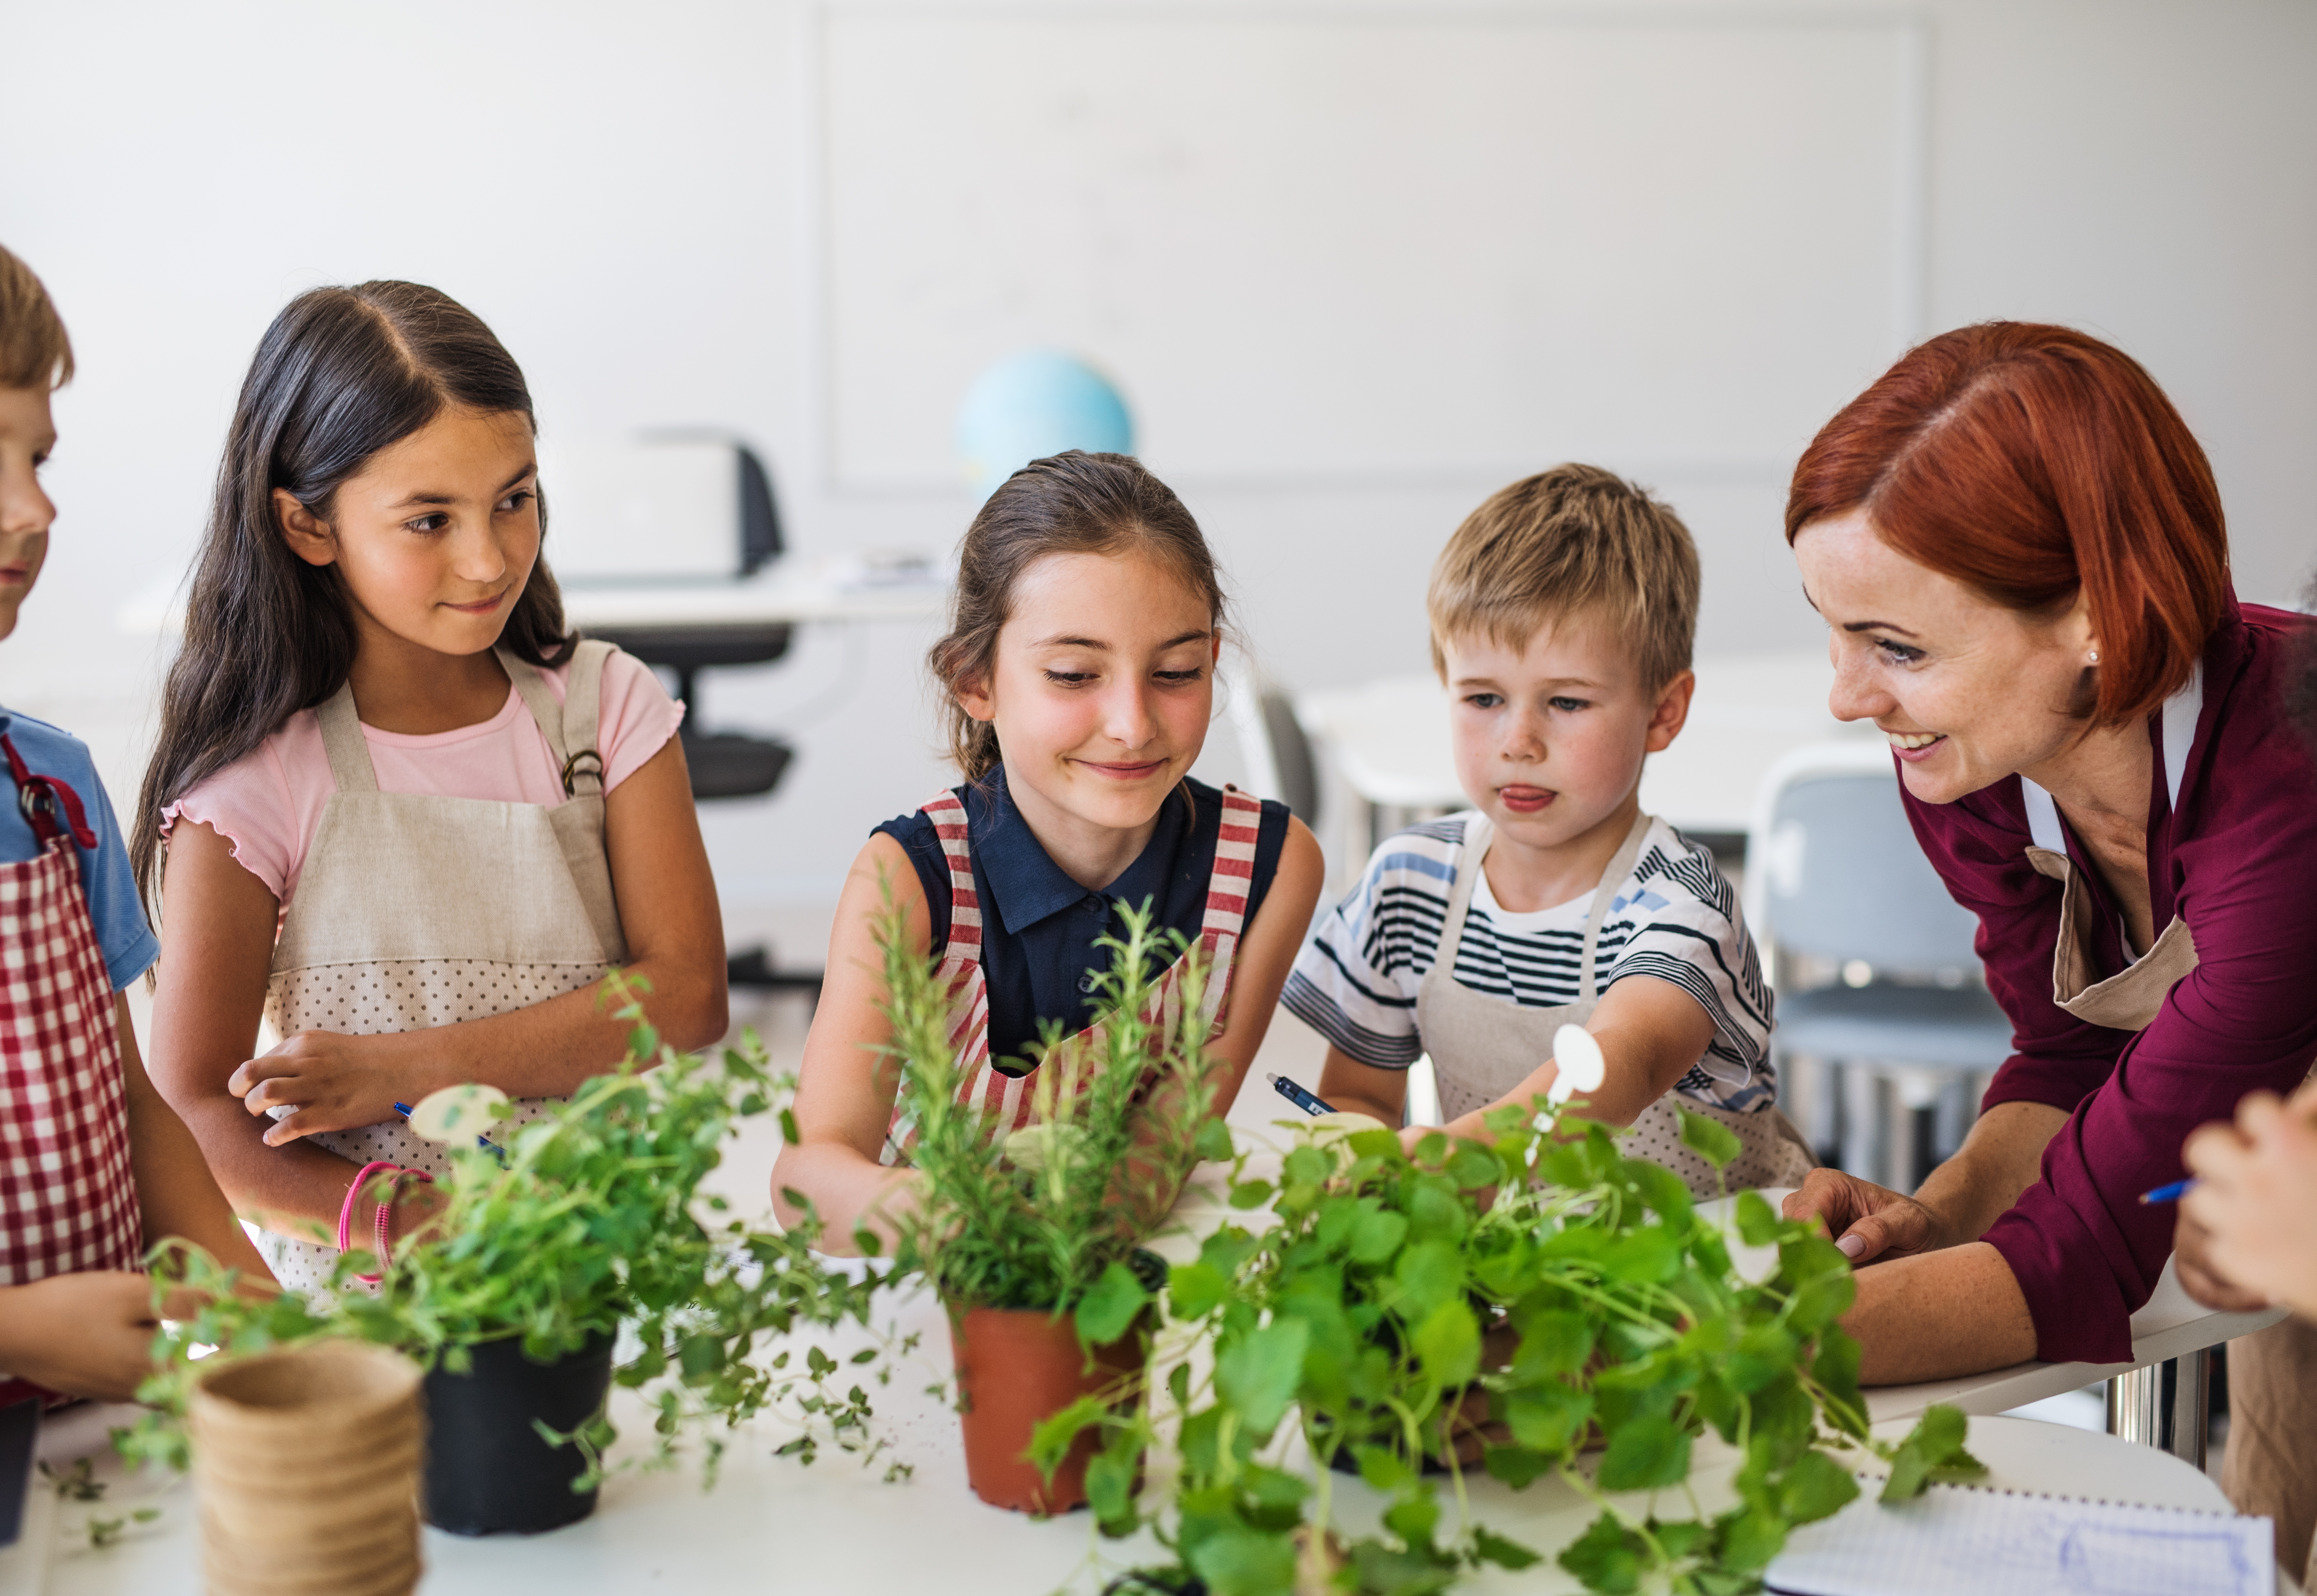 A group of small school kids with teacher standing in class, planting herbs.